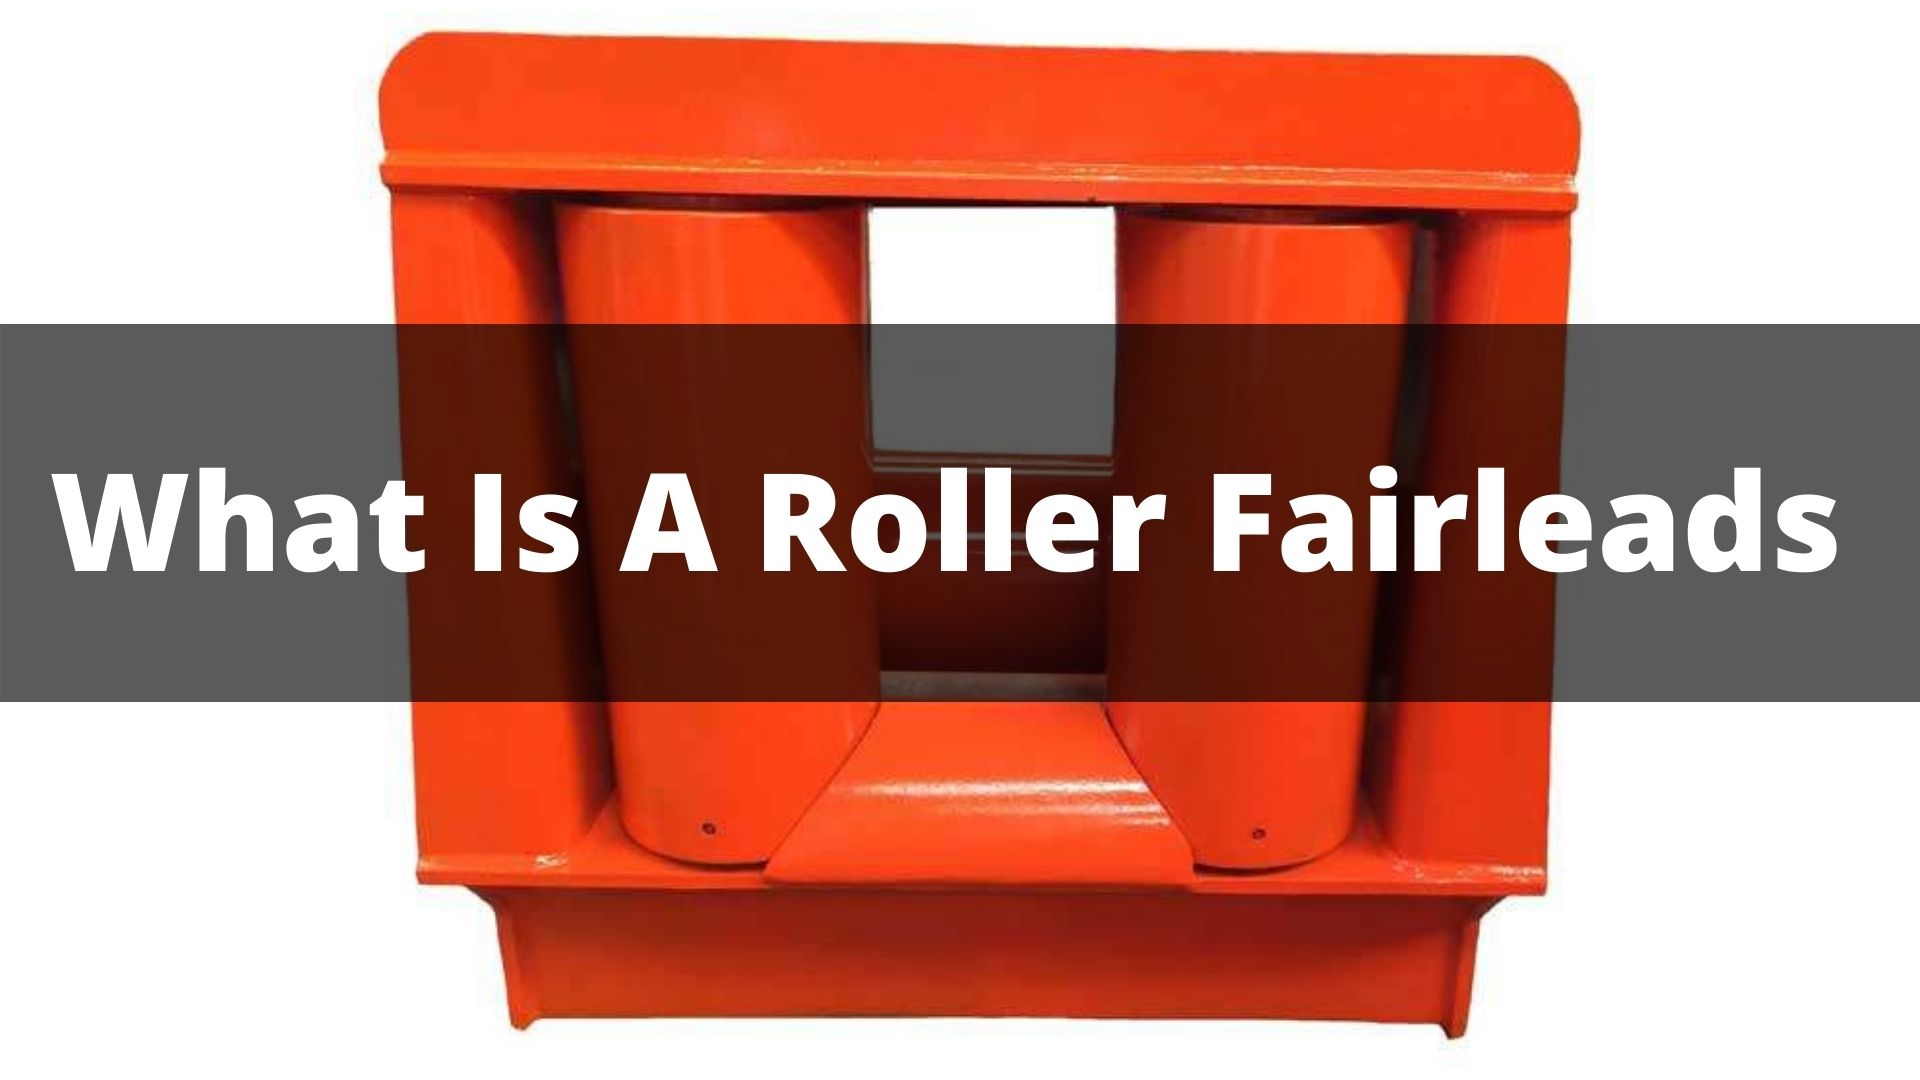 What Is A Roller Fairleads